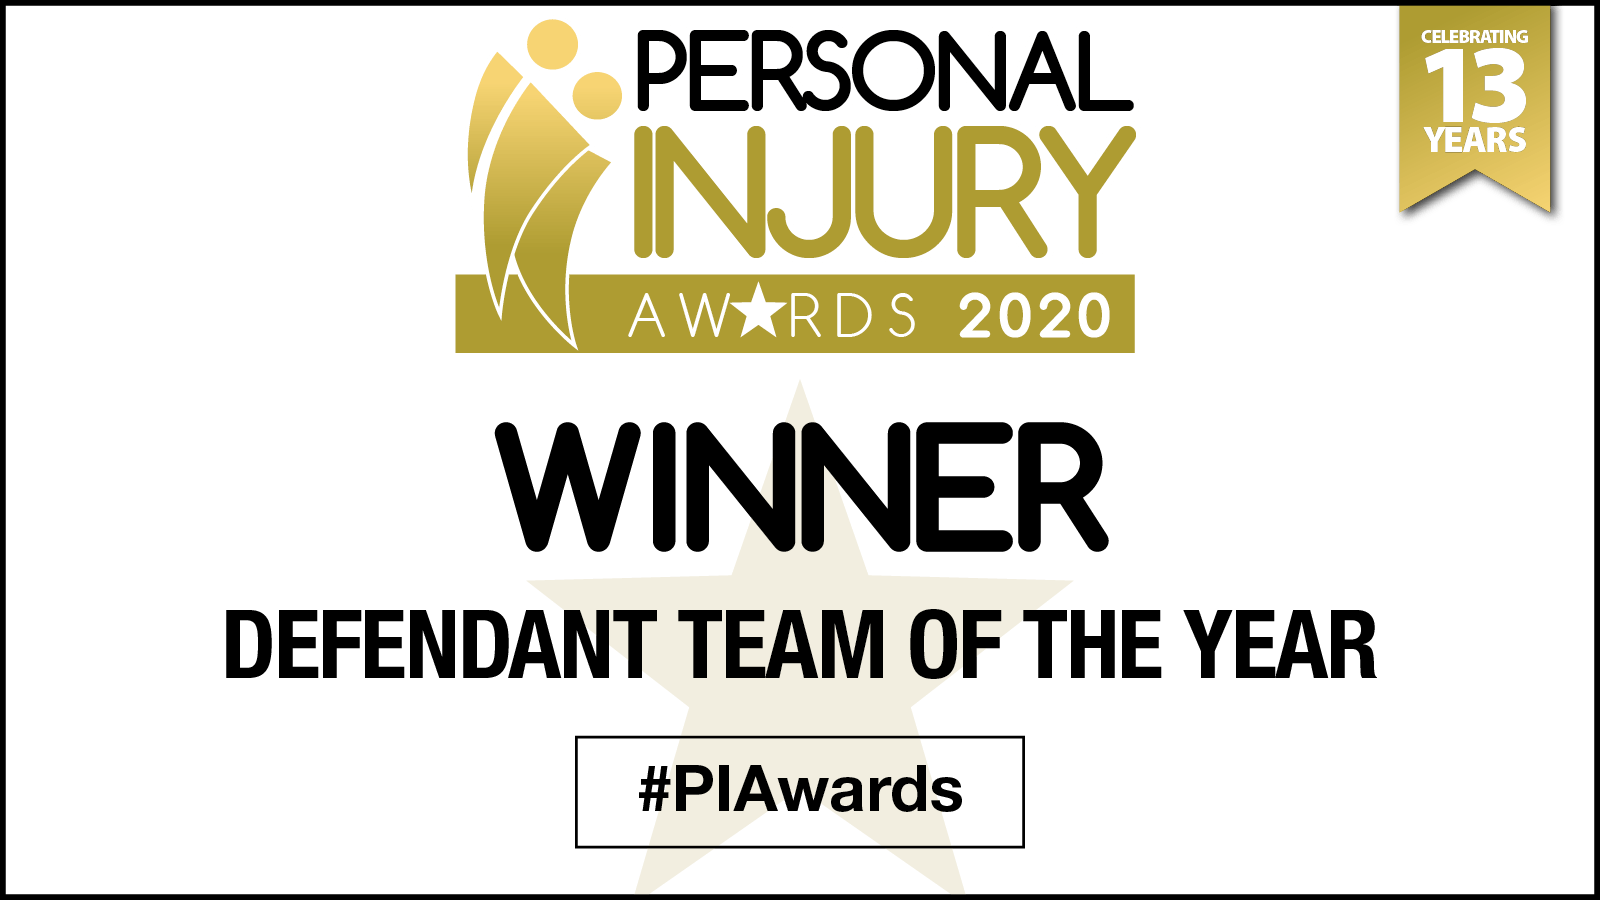 Defendant team of the year